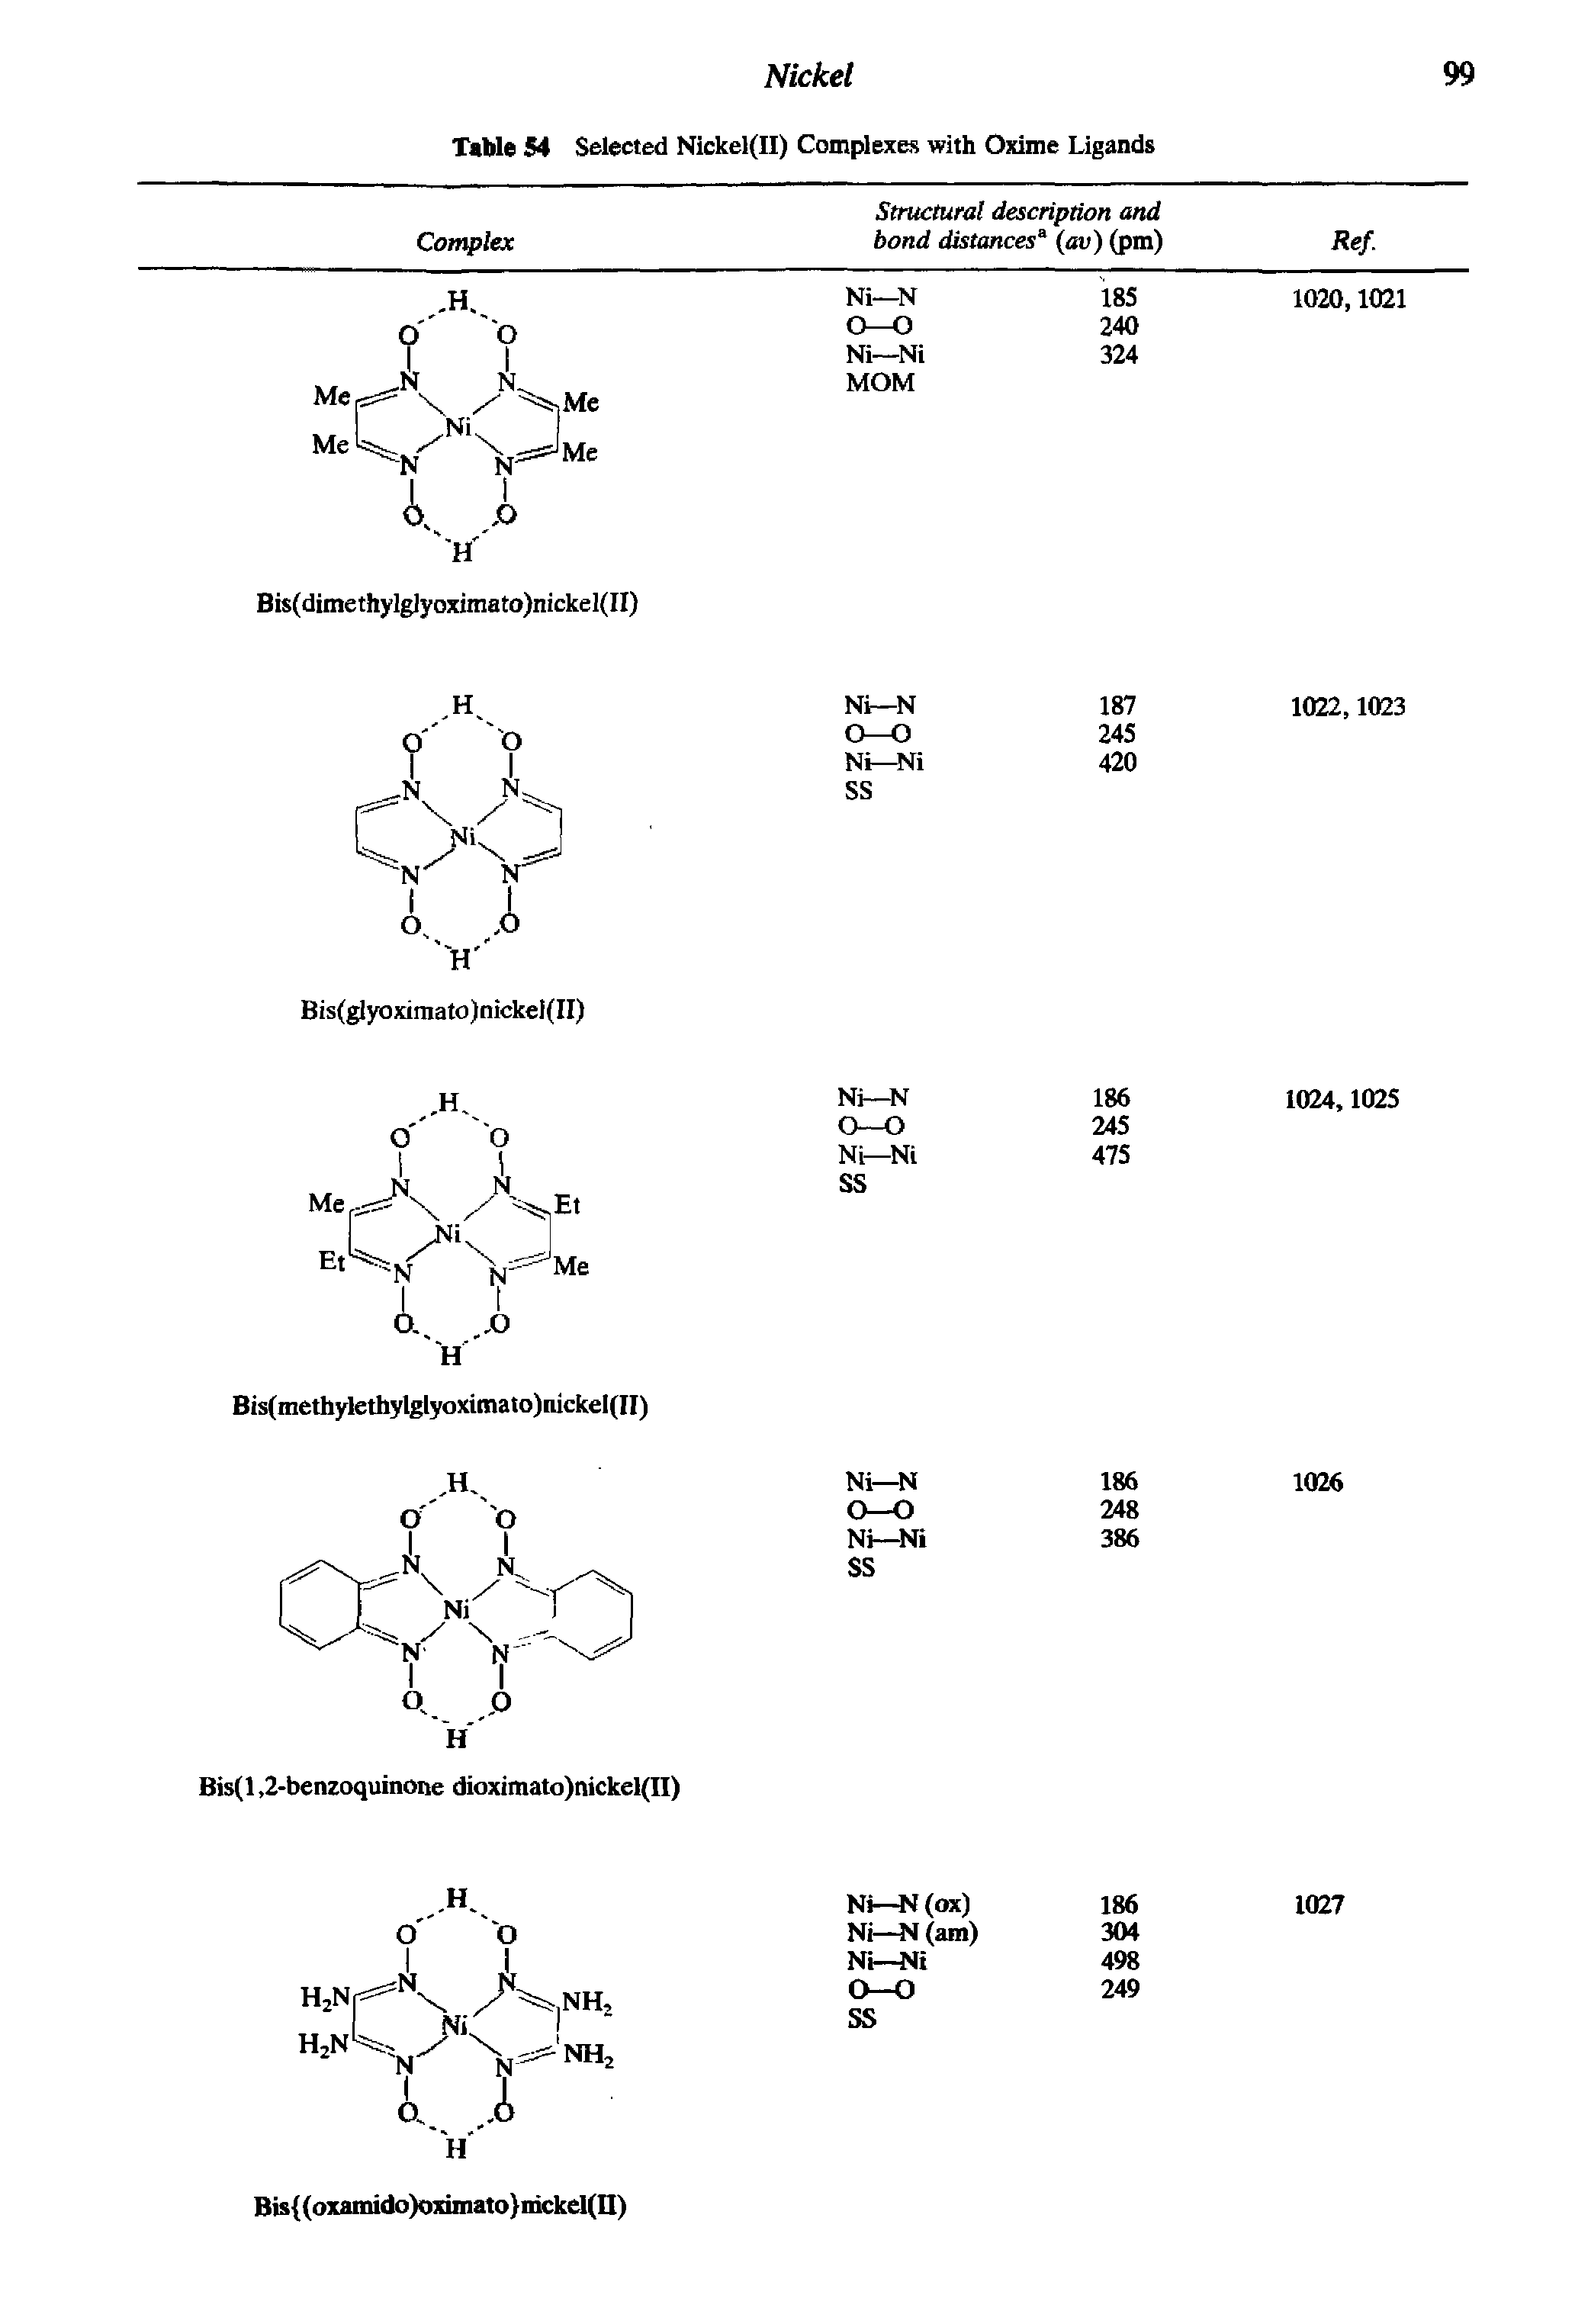 Table 54 Selected Nickel(II) Complexes with Oxime Ligands...